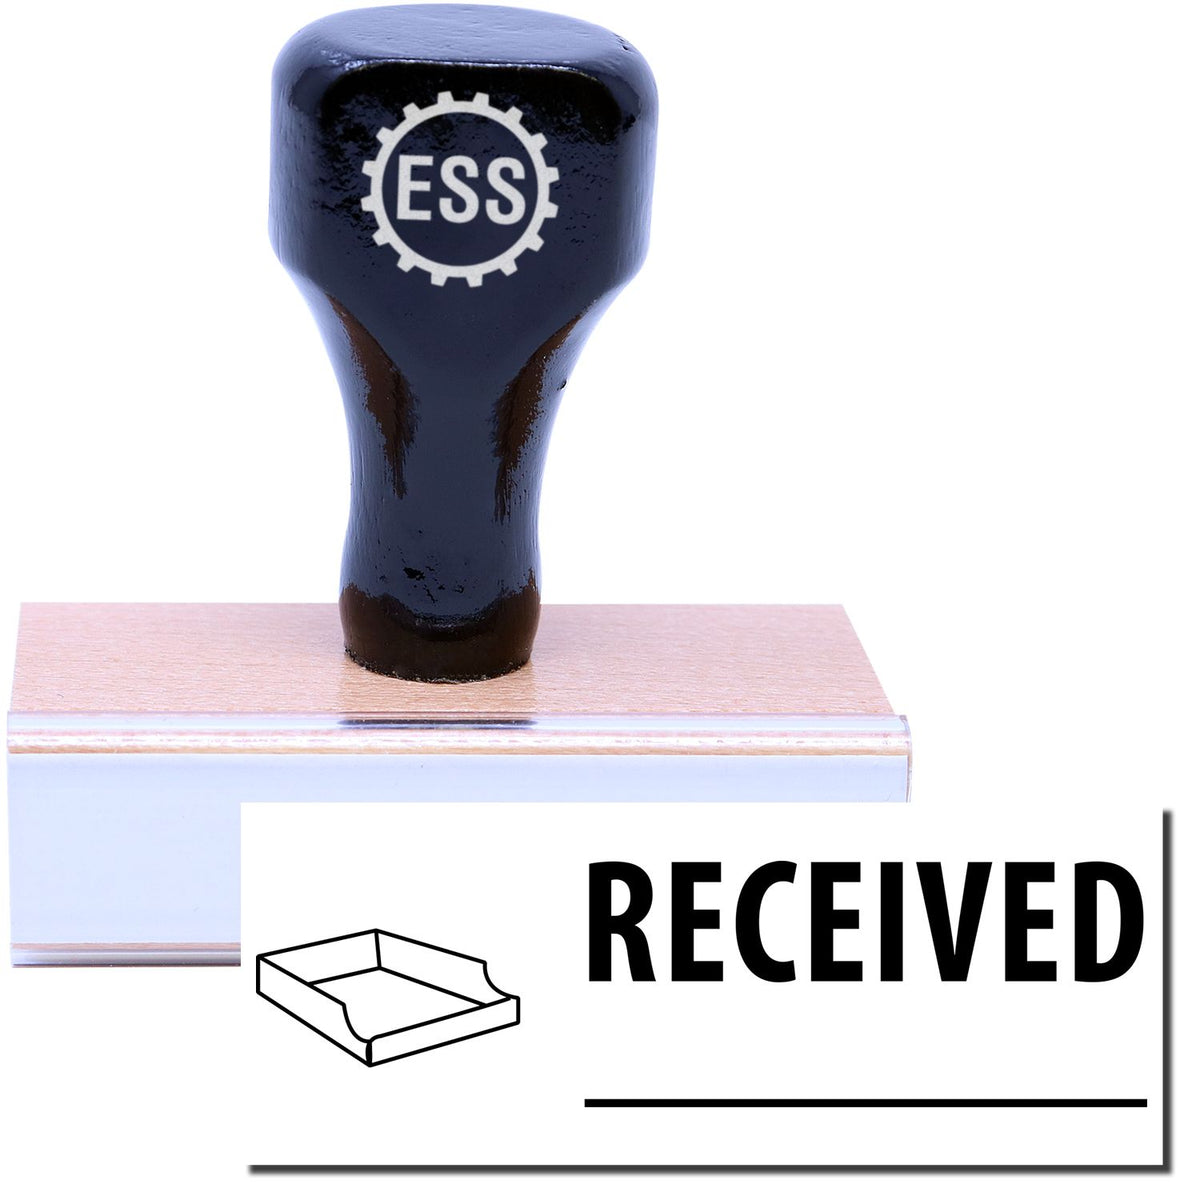 A stock office rubber stamp with a stamped image showing how the text &quot;RECEIVED&quot; in a large font with a line underneath the text and an inbox icon on the left side is displayed after stamping.